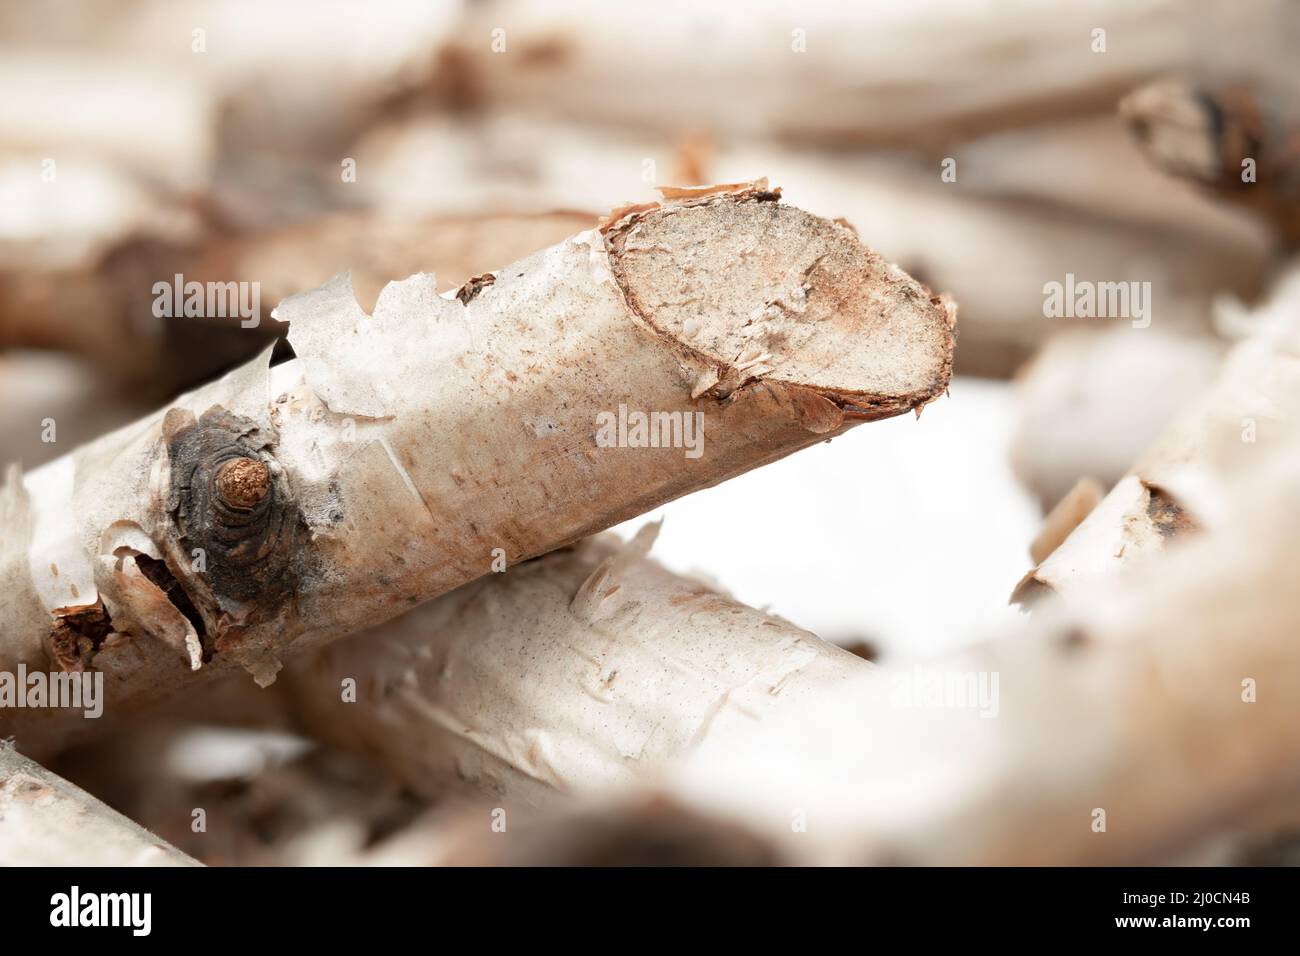 Cut birch twigs; close up. Natural wood background or texture. Birch tree wreath. Branches arranged in circular nest shape; used for table center piec Stock Photo